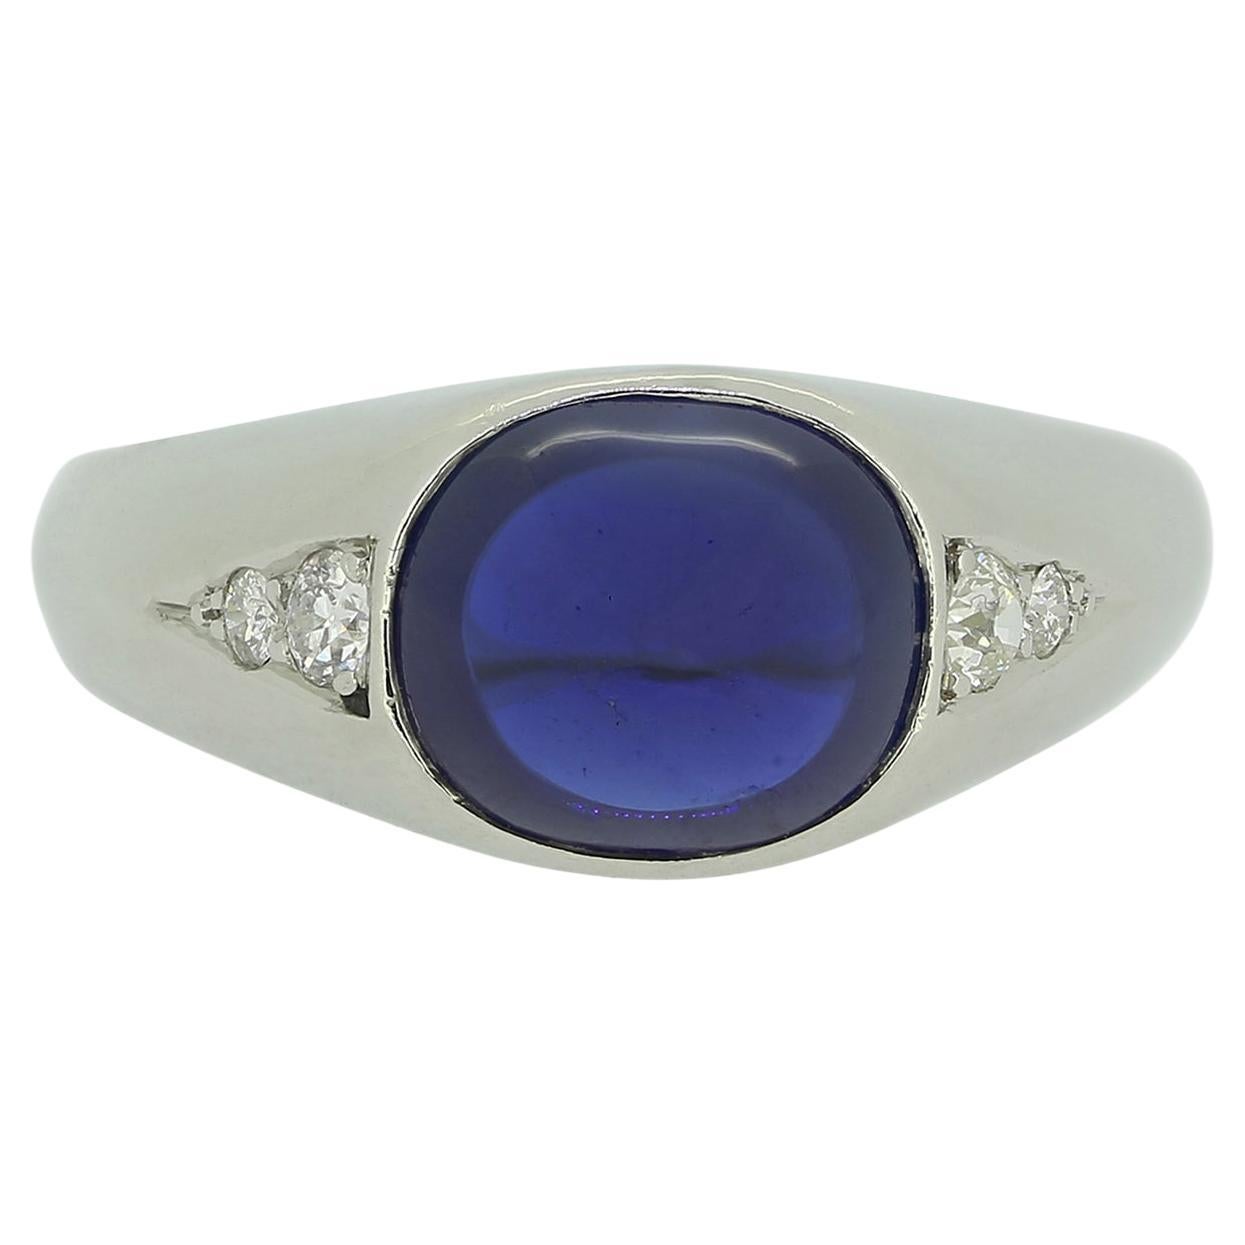 What is a cabochon sapphire?